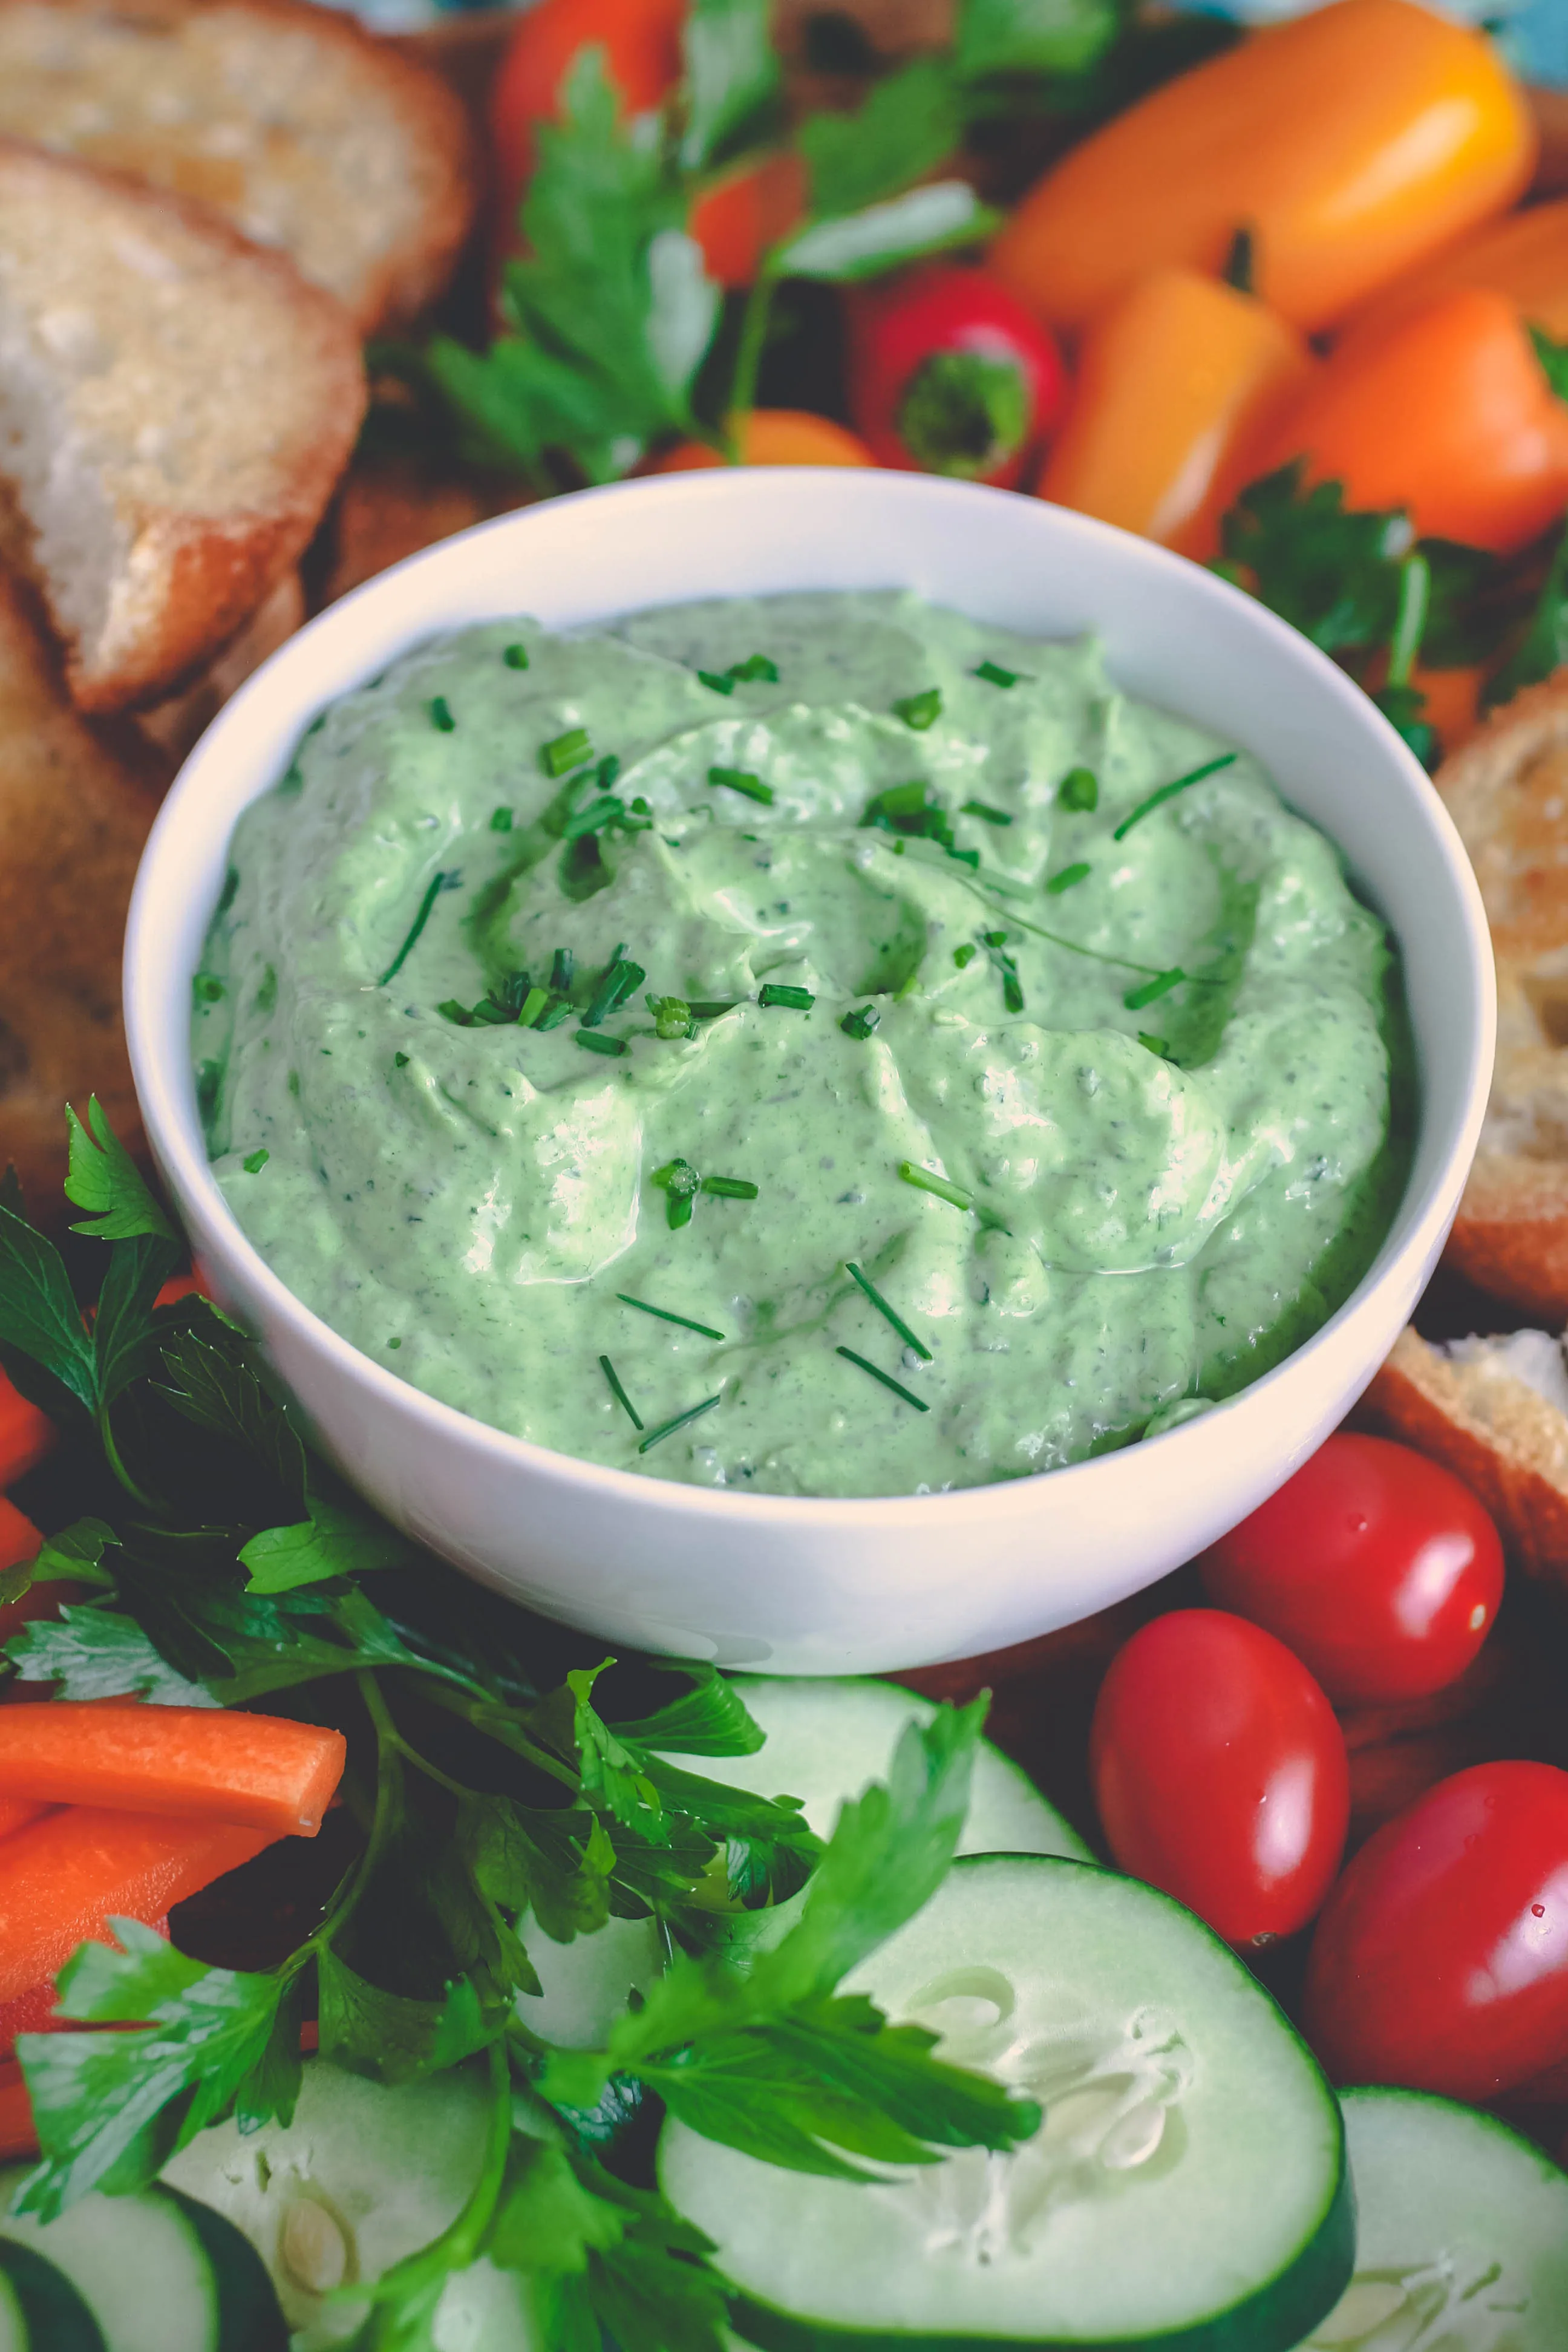 Creamy Green Goddess Dip is filled with great ingredients for a tasty snack. Creamy Green Goddess Dip is so nice to serve as a snack or appetizer!